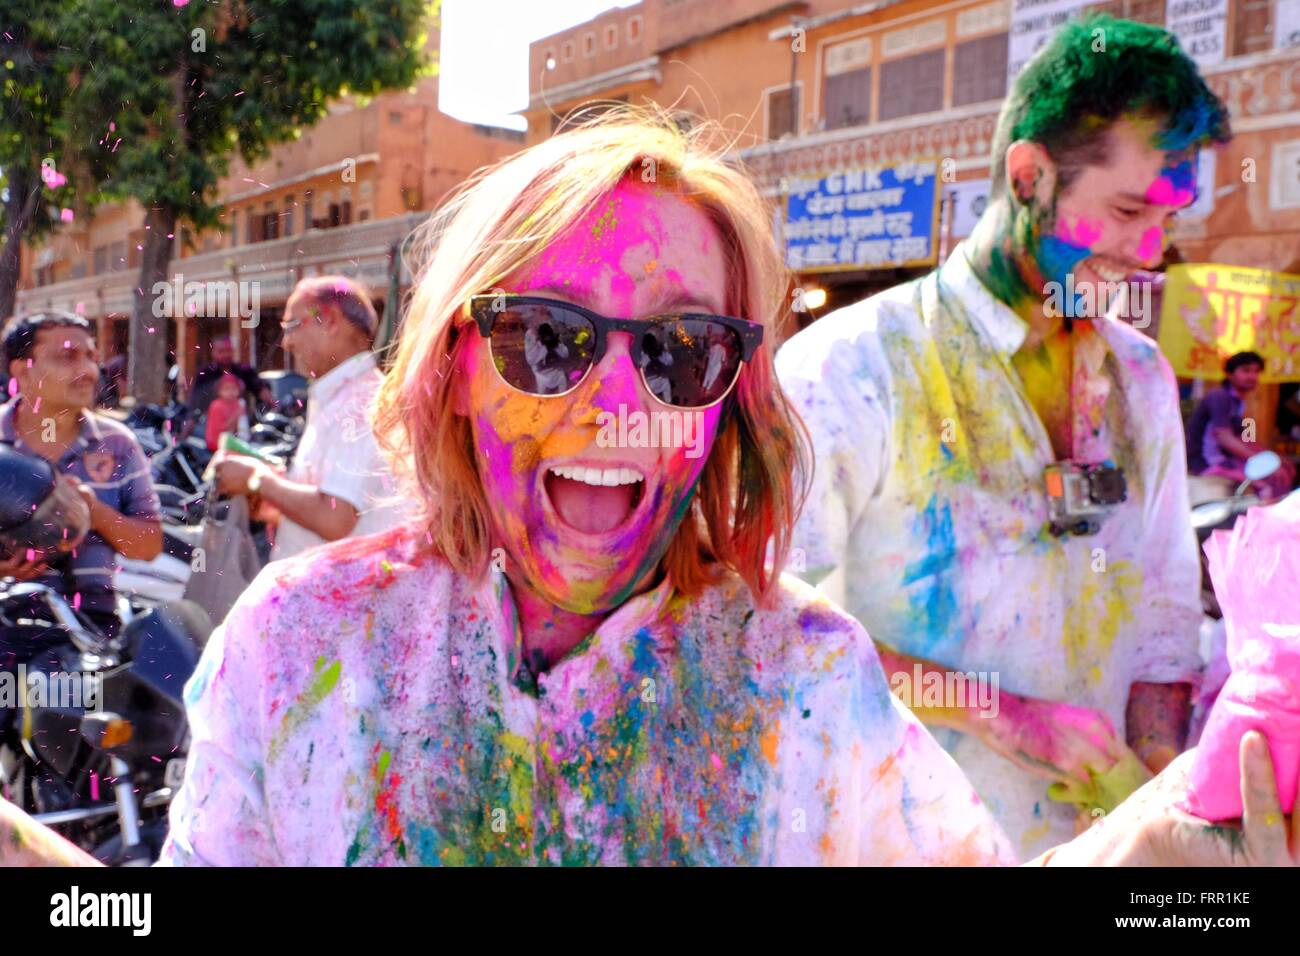 Jaipur, India. 24th March, 2016. Local families and tourists alike celebrate Holi Festival, also known as 'The Festival of Colours' in Jaipur. The ancient Hindu religious festival has become popular with non-Hindus in many parts of South Asia. Credit:  Tom Corban/Alamy Live News Stock Photo